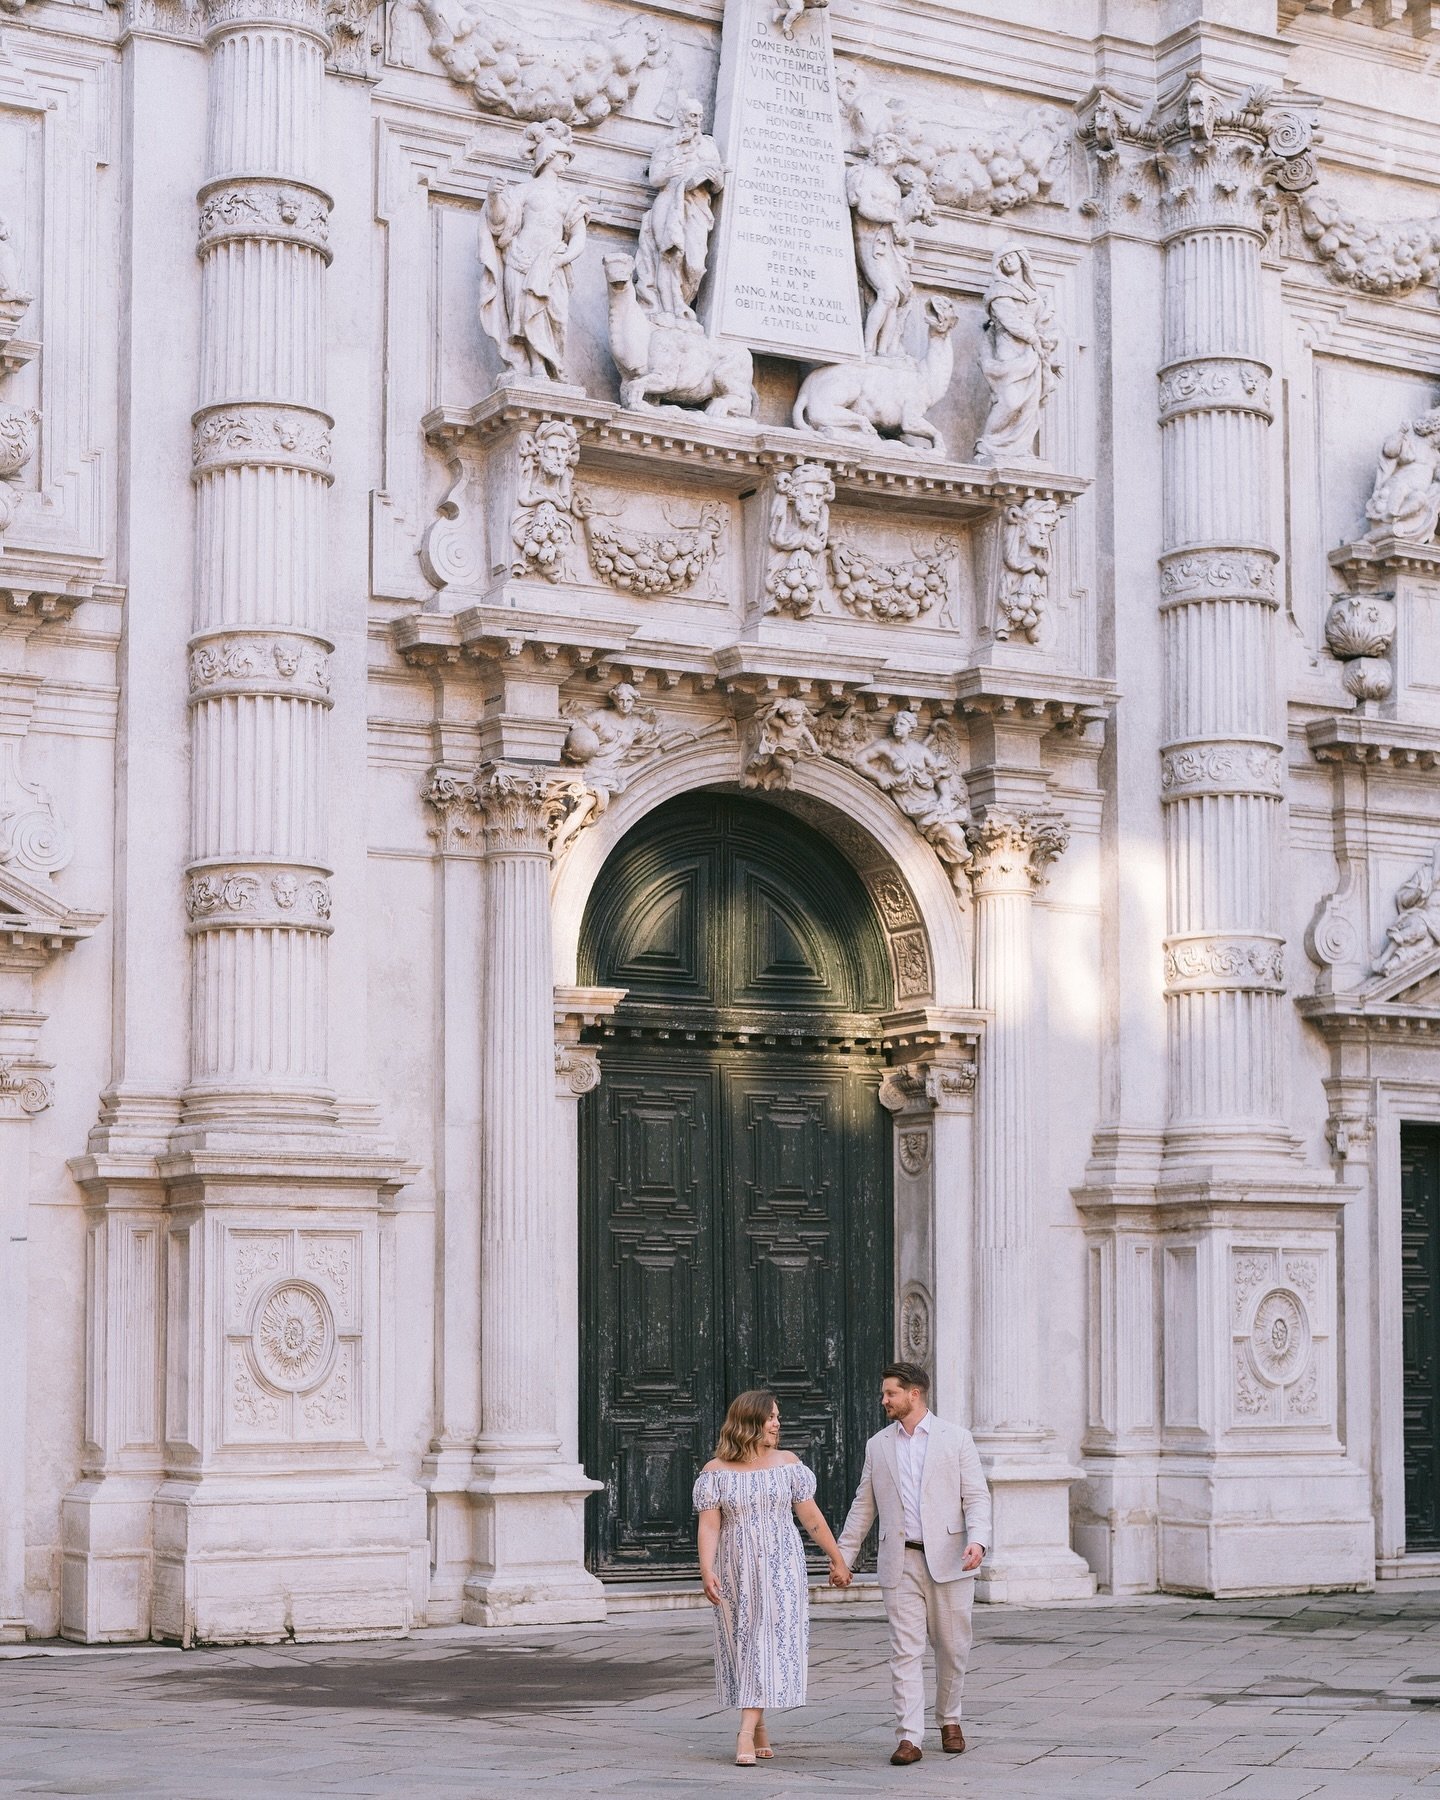 Surprise at the end of the gallery 💍🤫

&bull;
&bull;
&bull;

#venicephotographer#destinationweddingphotographer#engagement#engagementitaly#engagementvenice#proposalvenice#veniceweddingphotographer#veniceweddingphotoshoot#veniceweddingphotographer#i